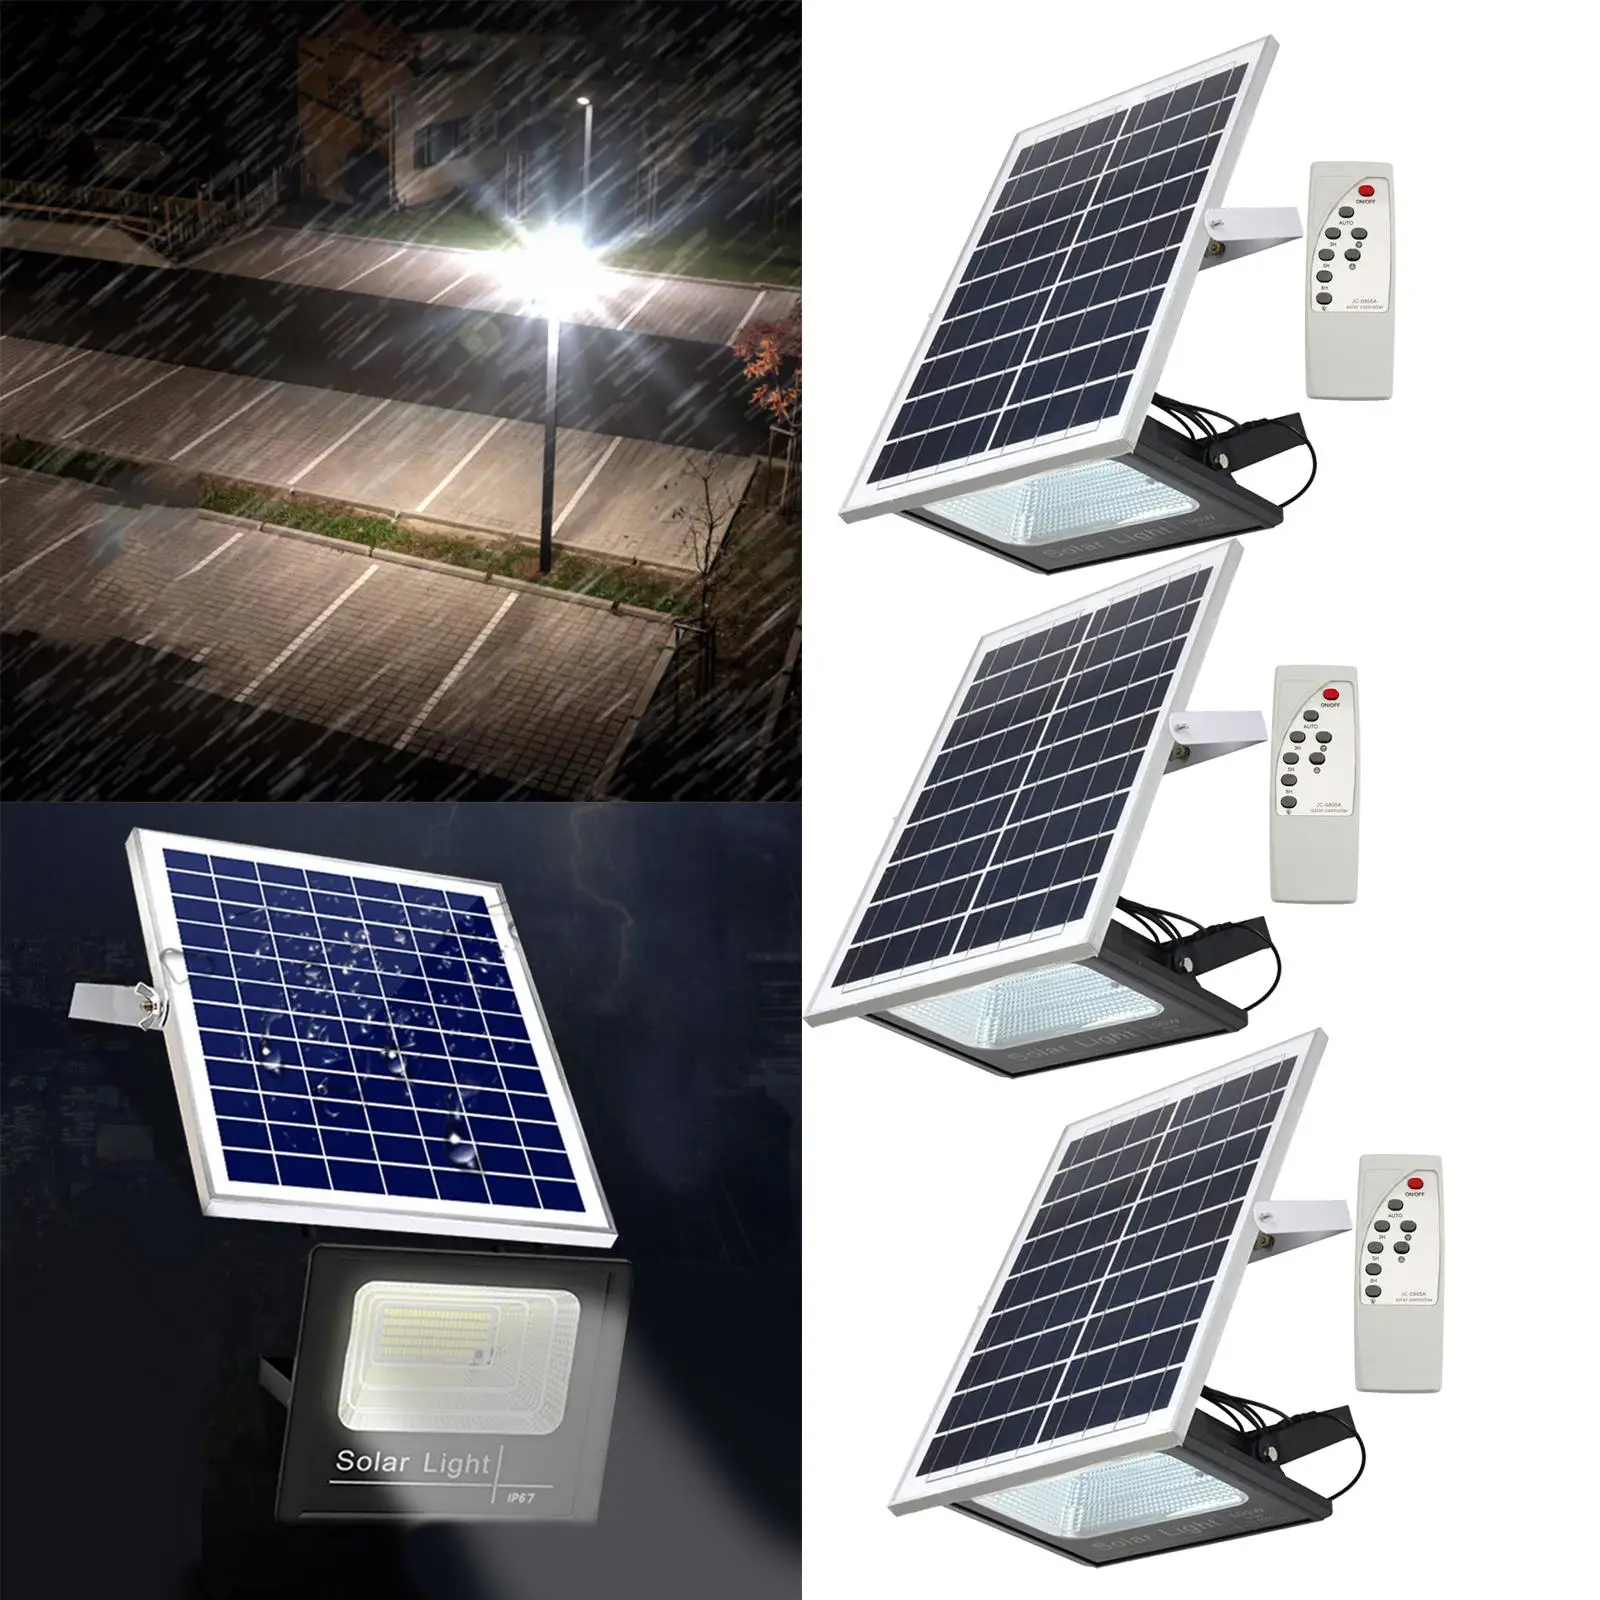 Outdoor Solar Flood Light IP67 Waterproof with Remote Control for Lawn Playground Yard Garden Patio